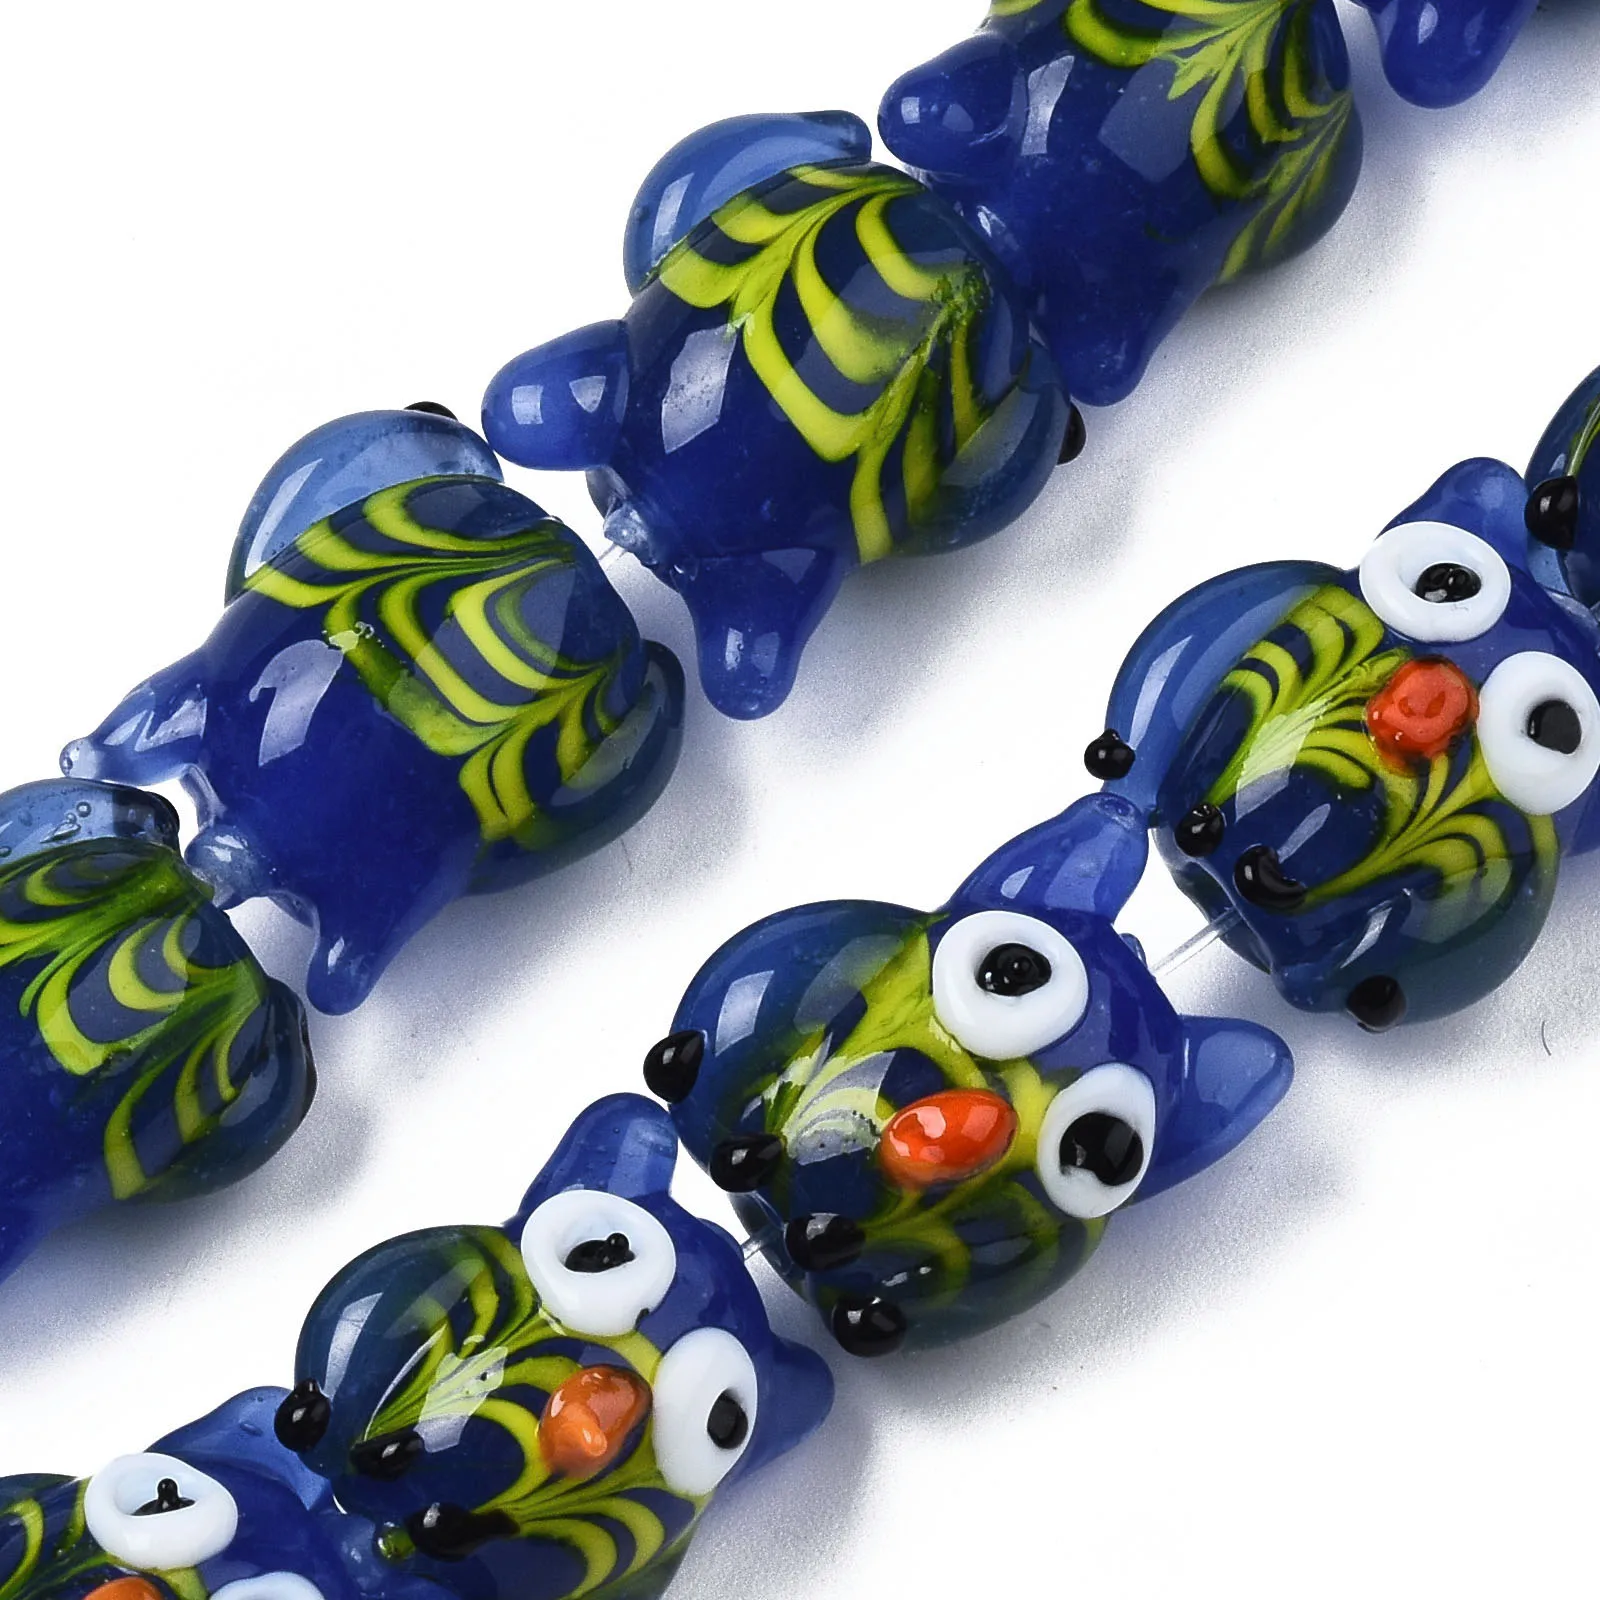 

30pcs/strand Handmade Bumpy Lampwork Beads Colorful Owl Loose Spacer Beads For Cute Necklace Bracelet Jewelry Making Accessories